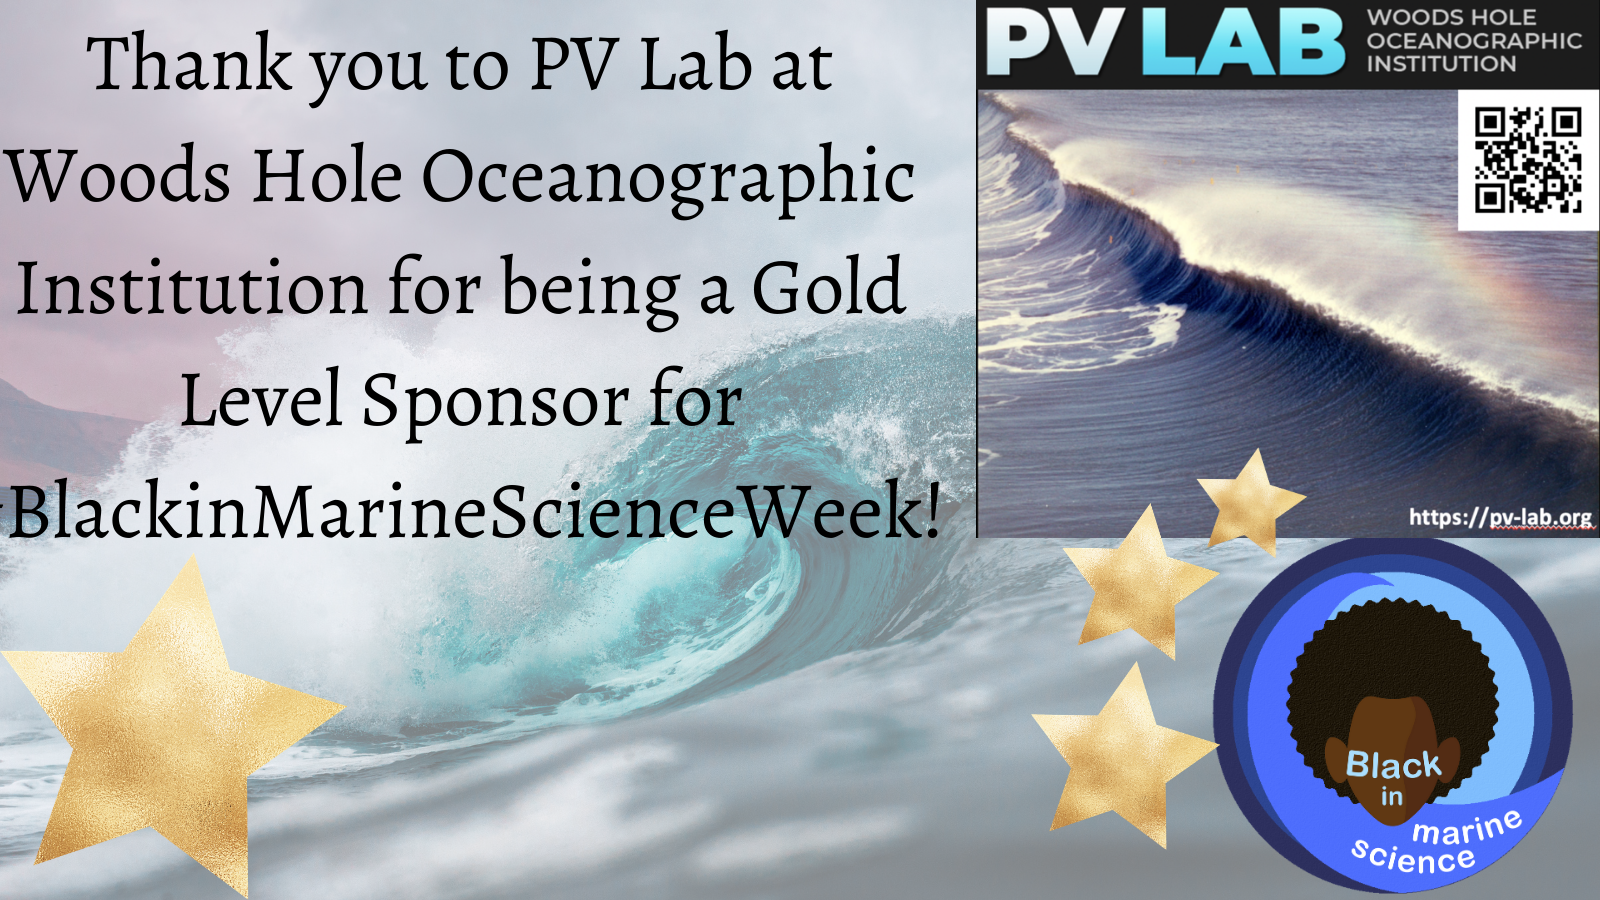 Thank you to the PVLab at the Woods Hole Oceanographic Institution for being a Gold Level Sponsor for Black in Marine Science Week